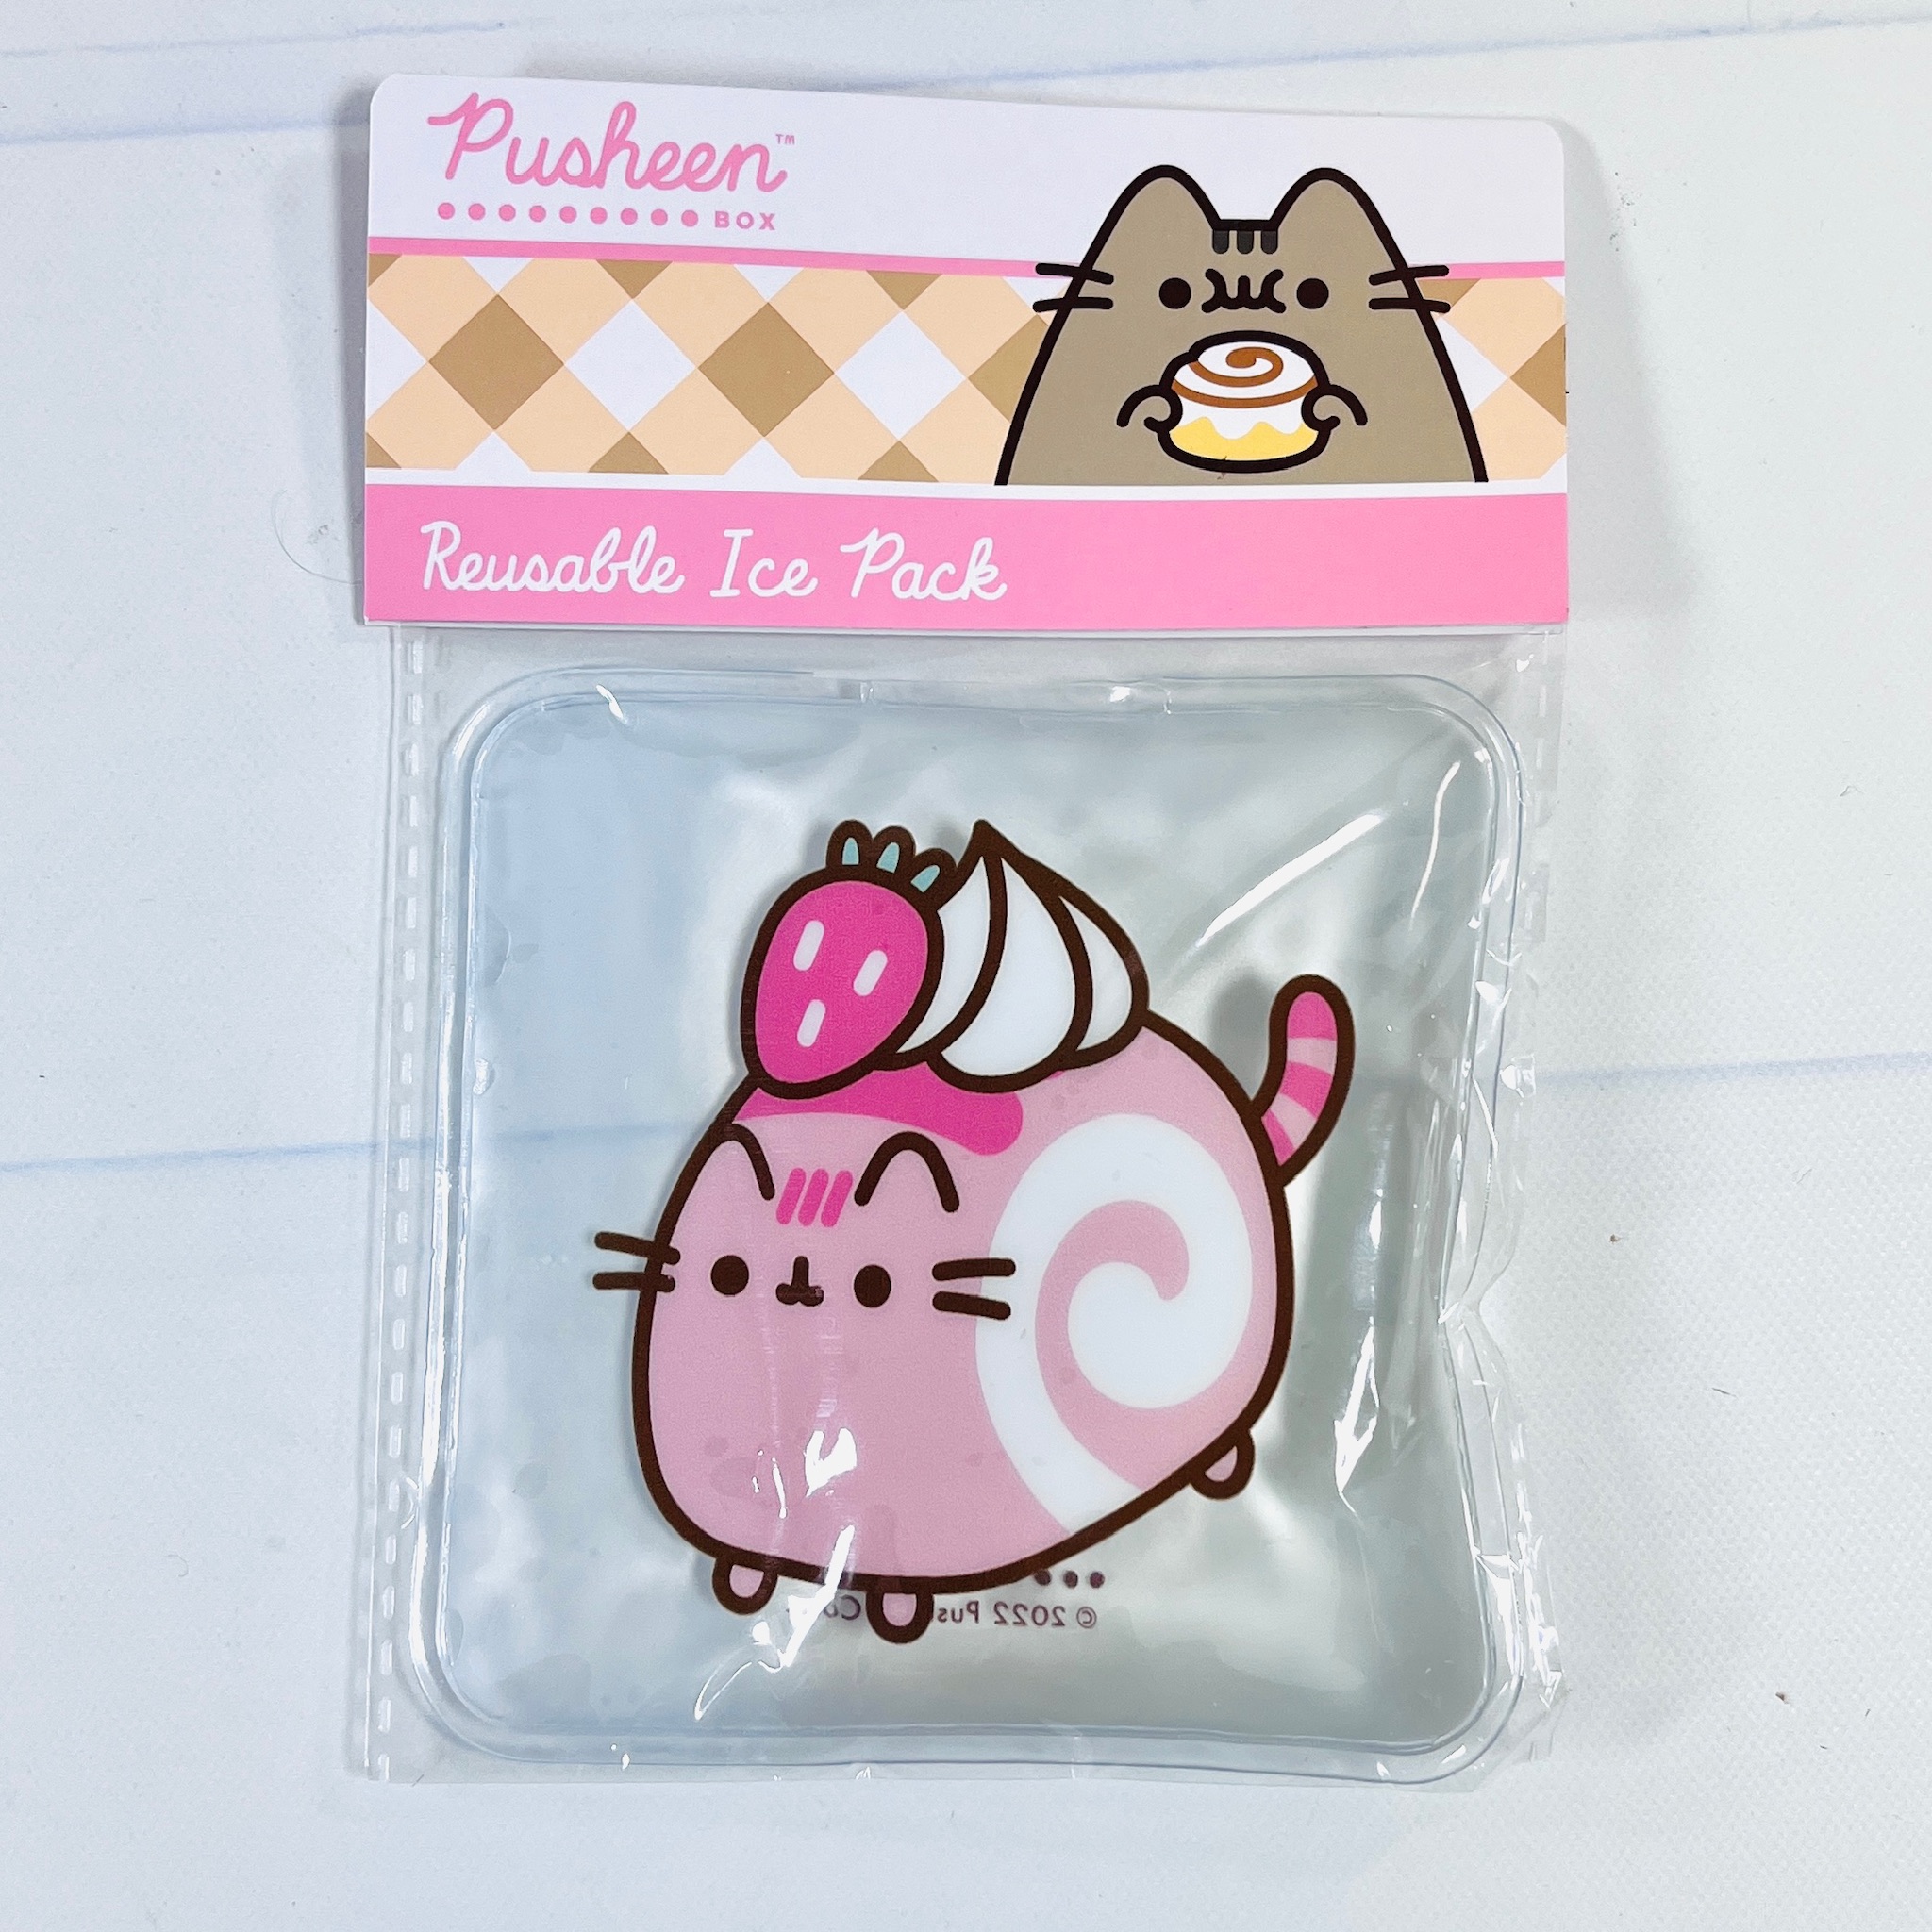 Pusheen Box Review: Sweet Picnic This Summer 2022! - Hello Subscription